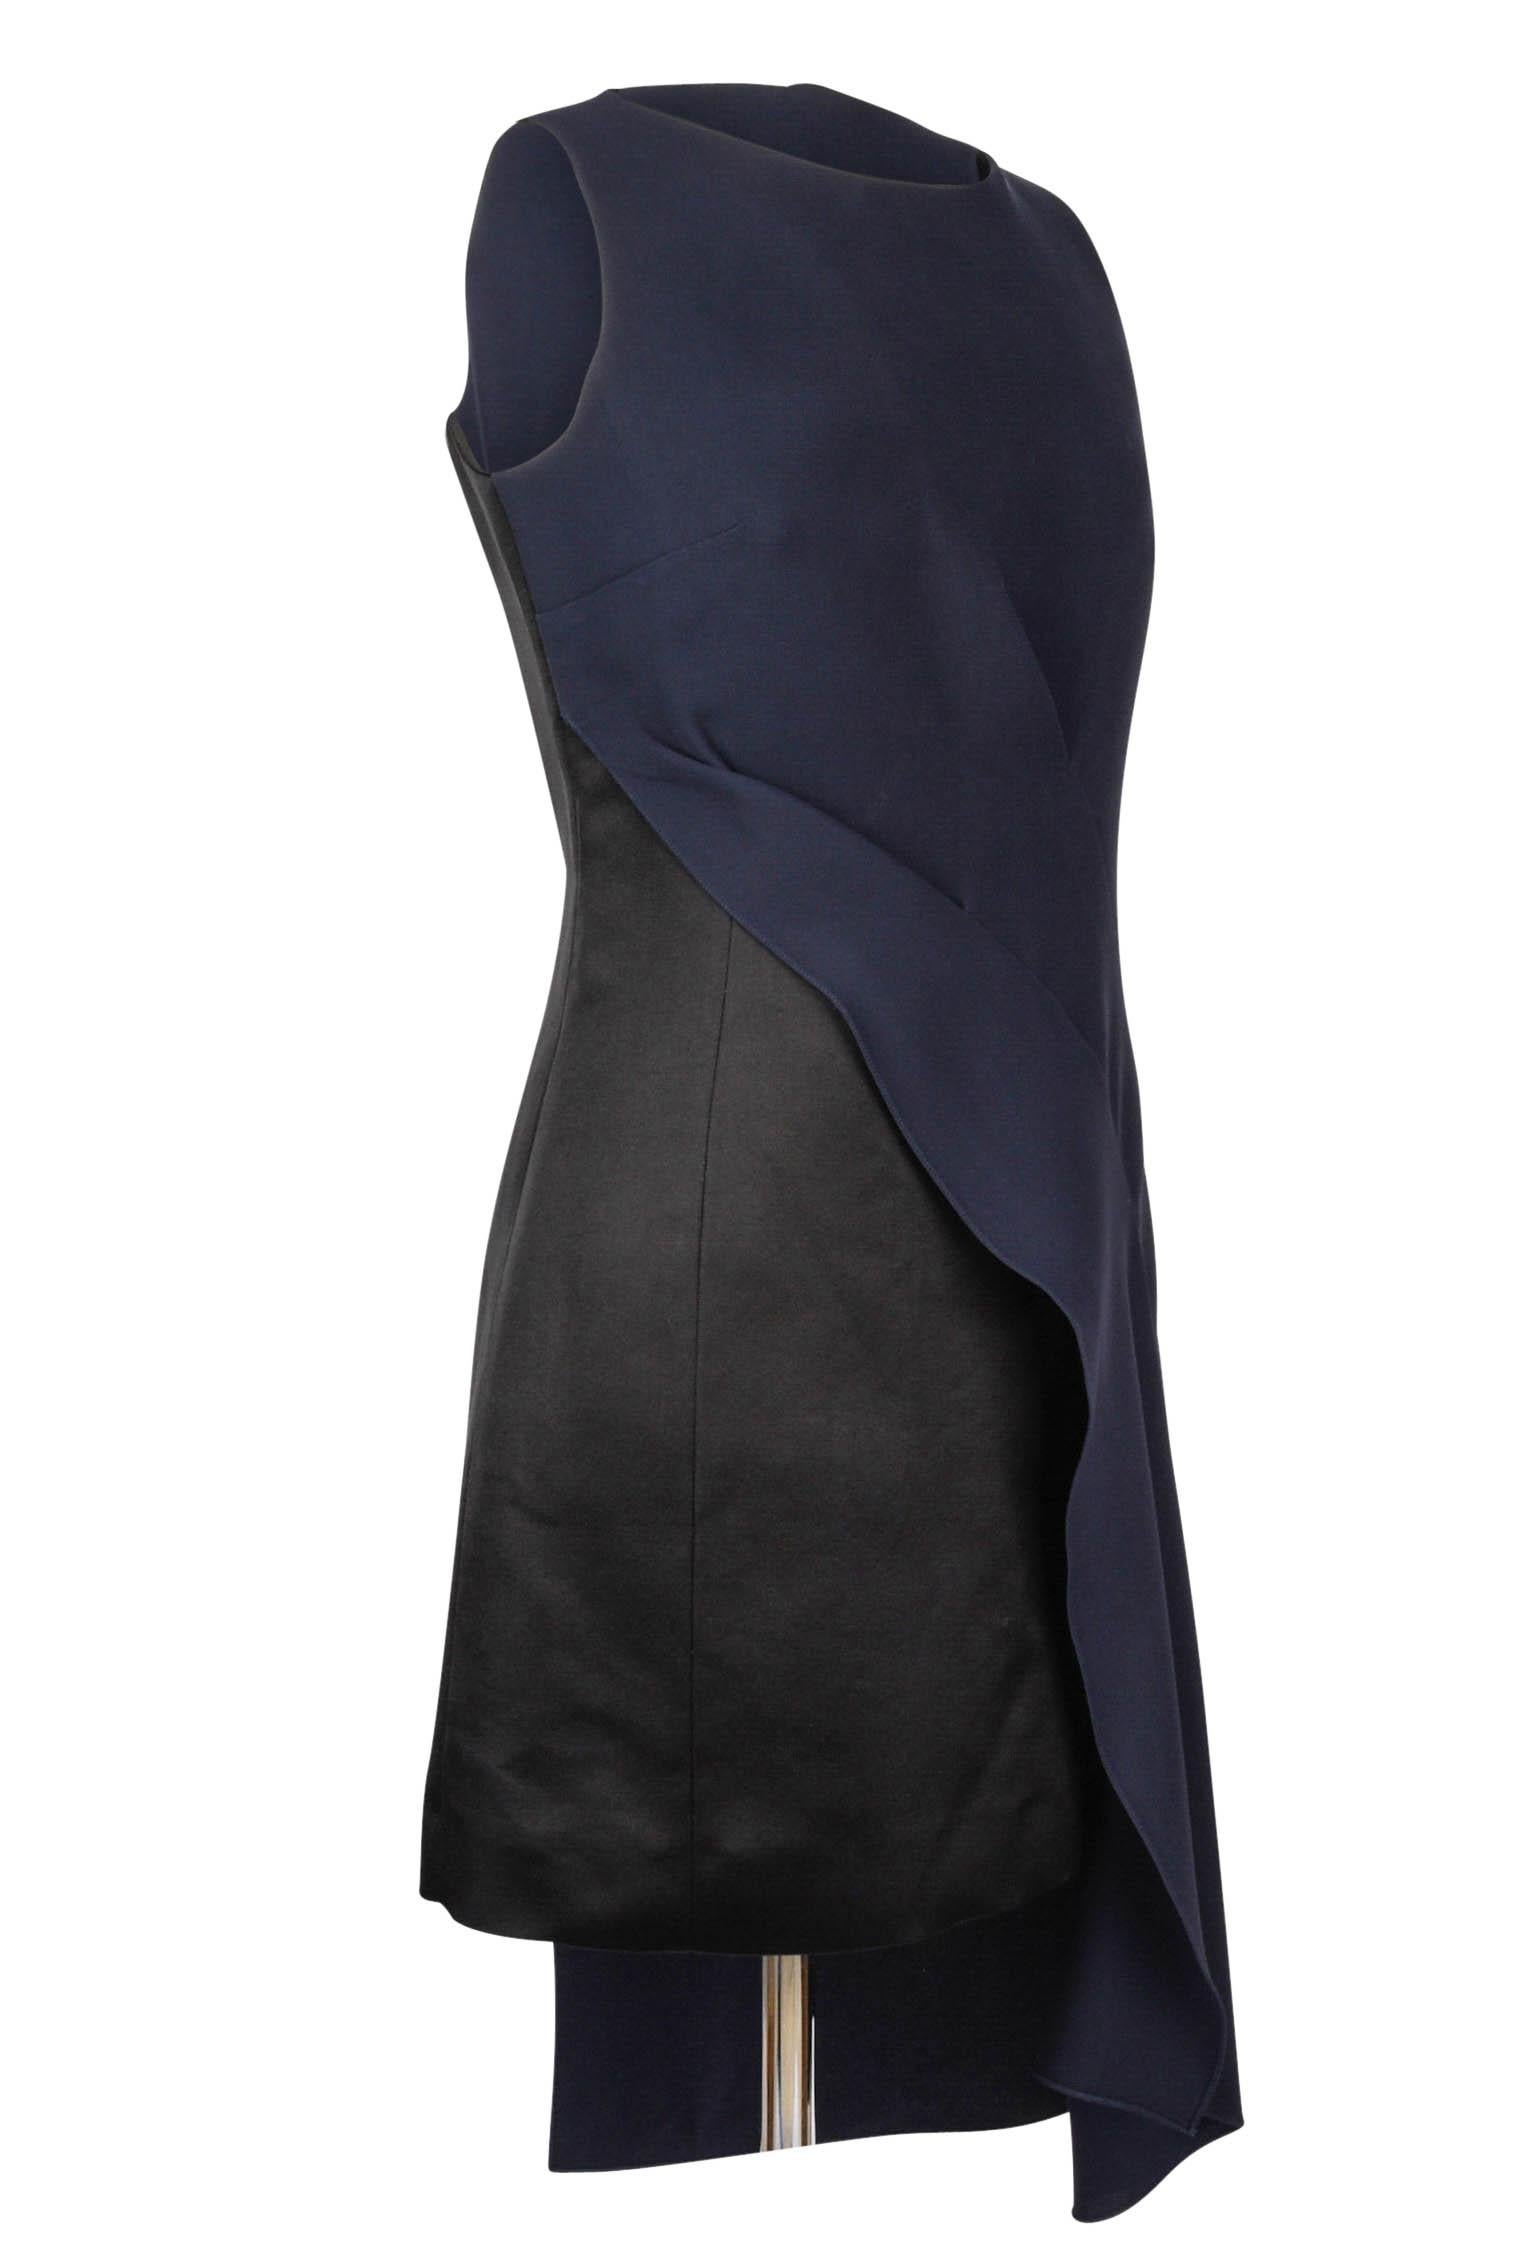 Christian Dior Dress Asymmetrical Black / Navy Evening fits 6  In Excellent Condition In Miami, FL